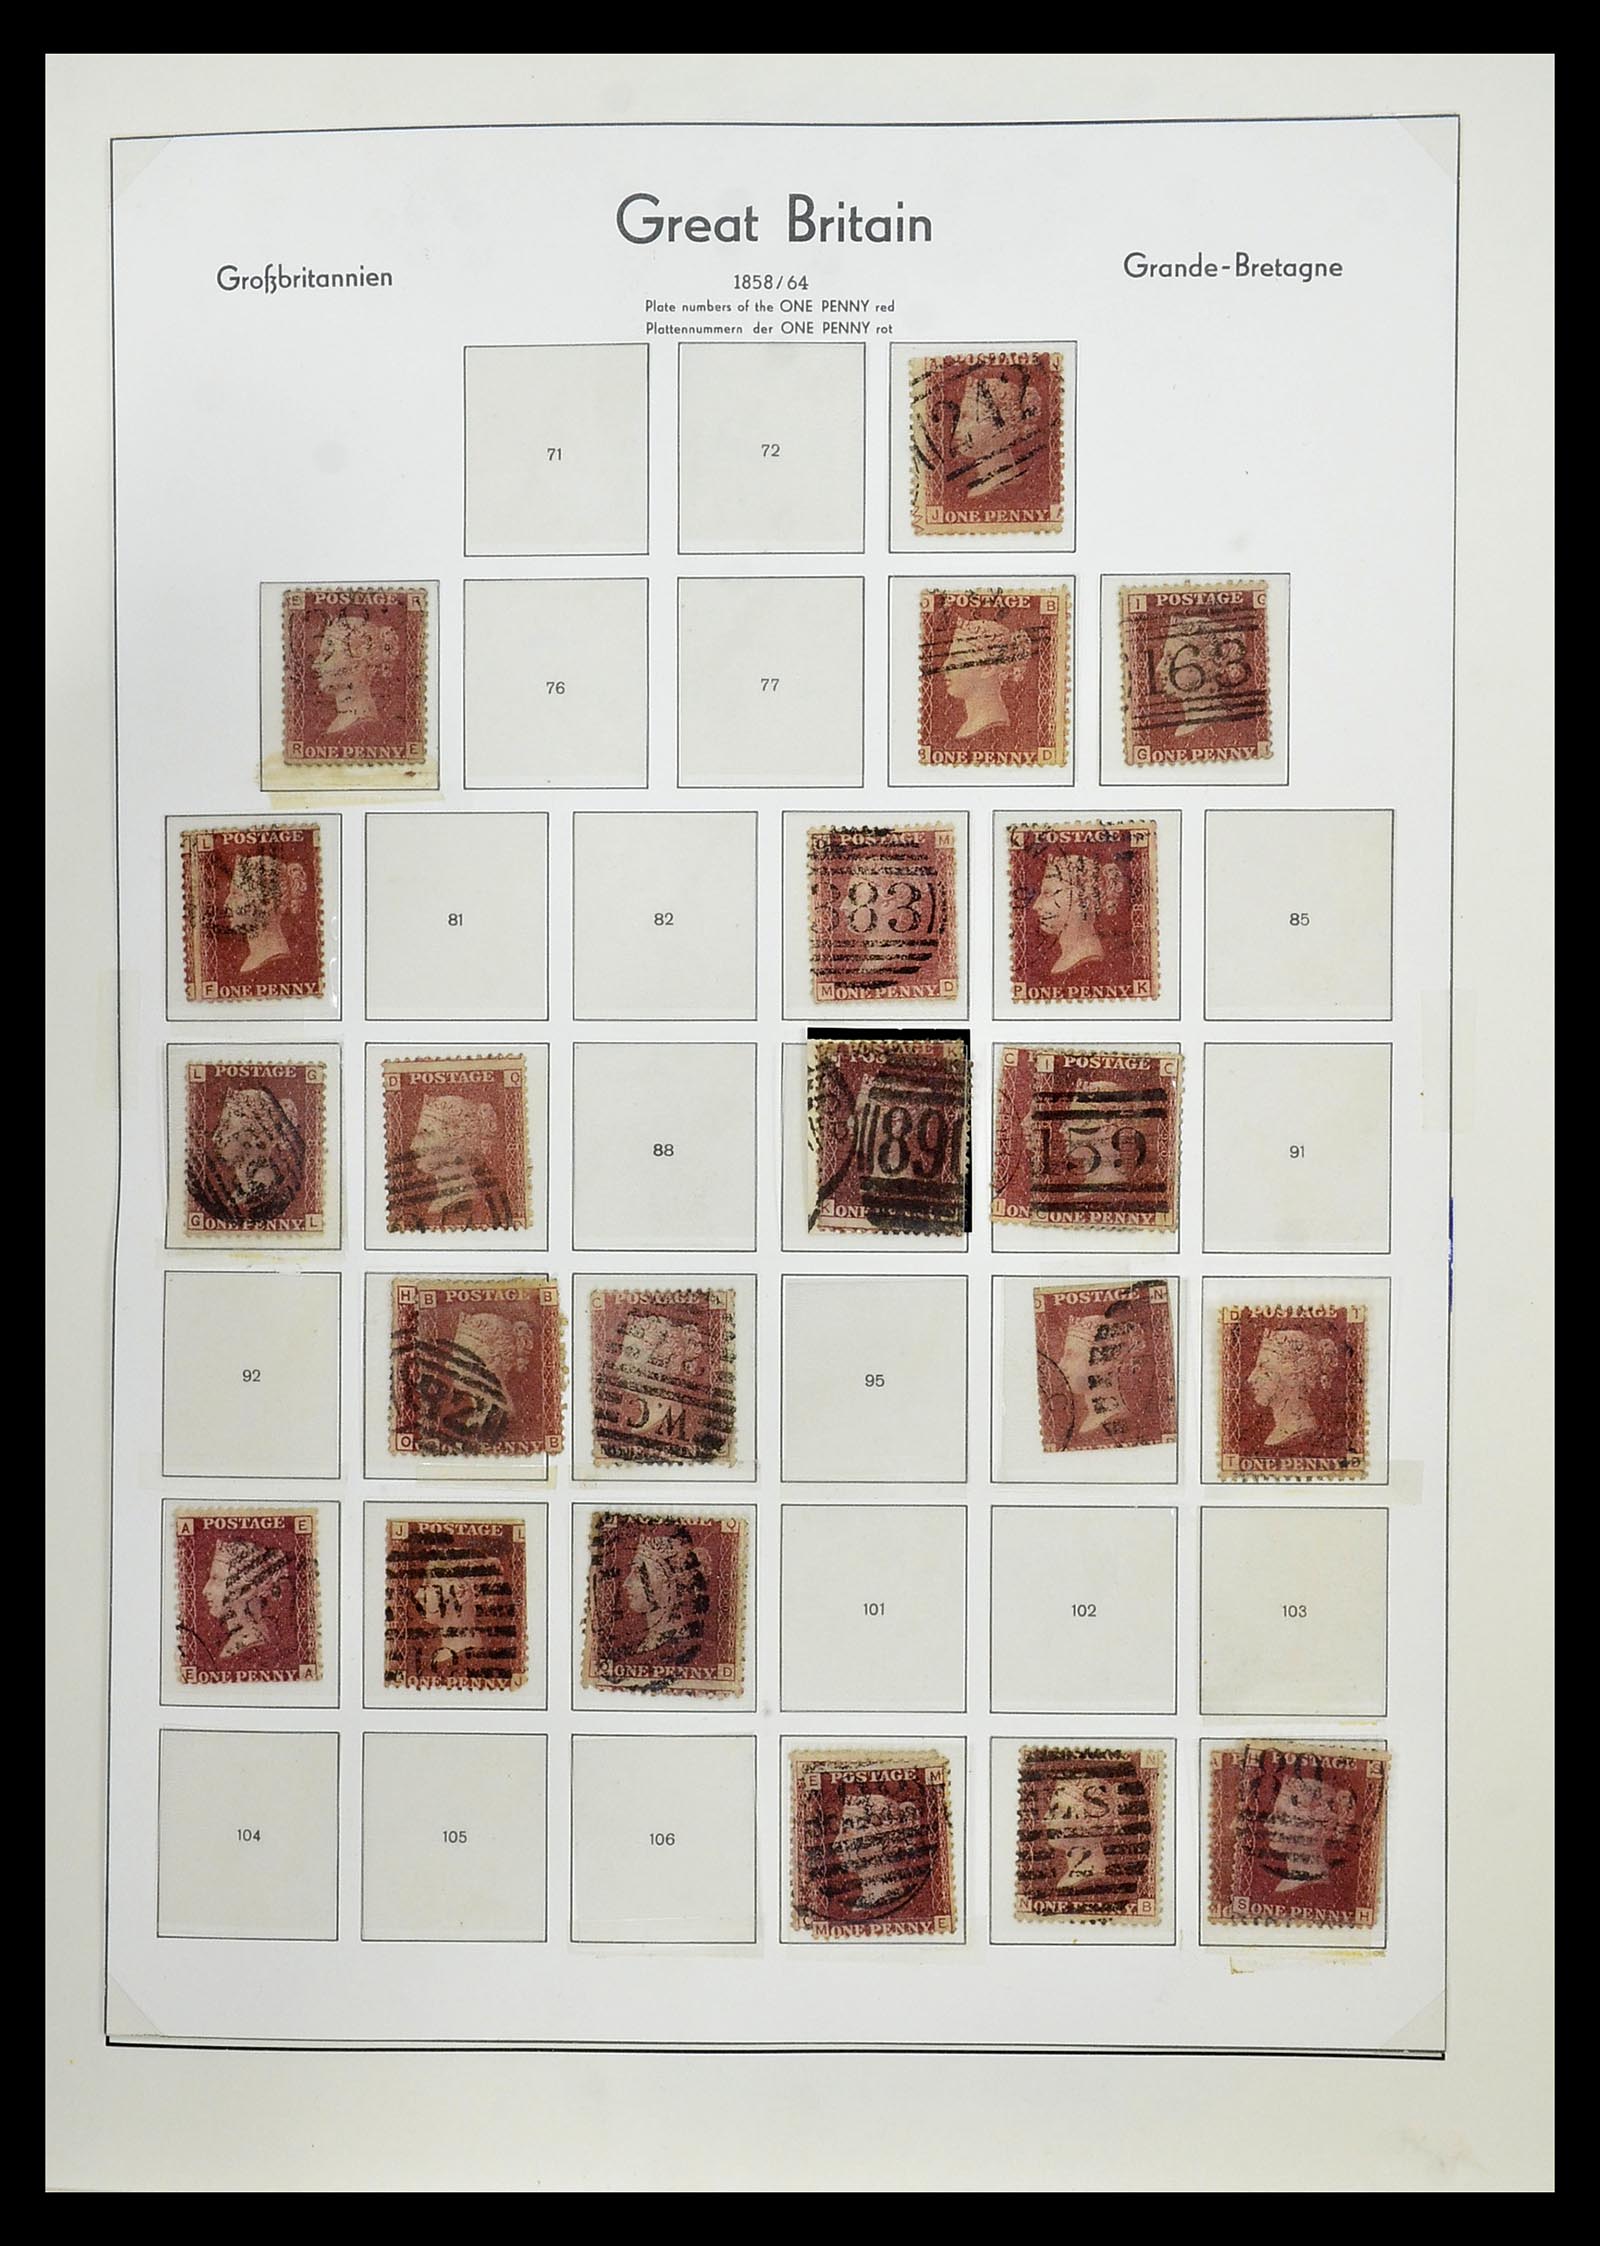 34784 013 - Stamp Collection 34784 Great Britain 1840-1950.